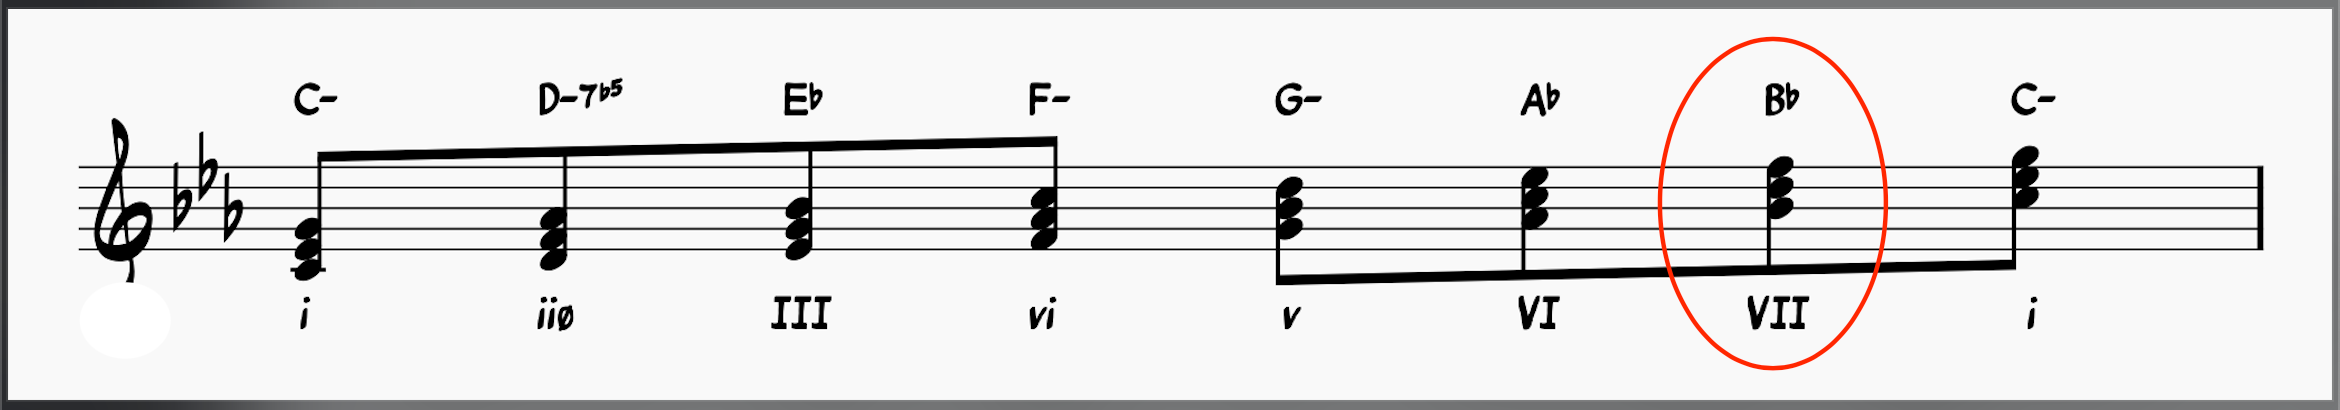 Moon River chords: Chords in the key of C minor